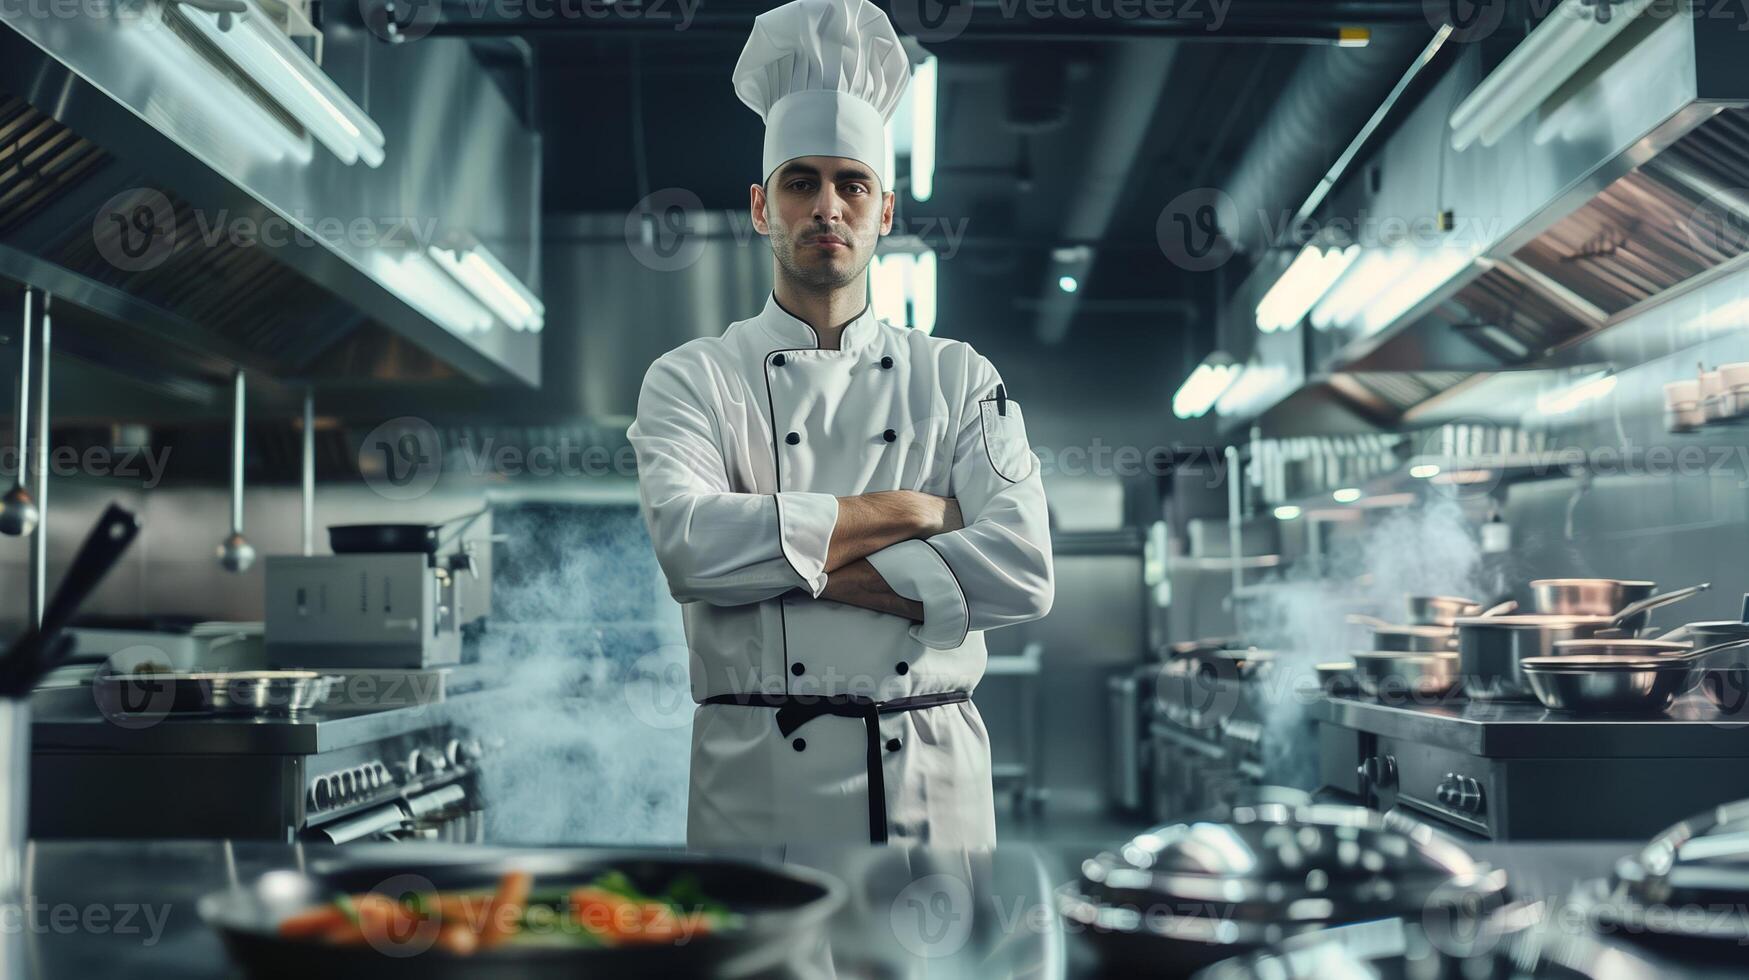 AI generated Confident Caucasian male chef with arms crossed standing in a commercial kitchen with steam rising from cooking pots on the stoves photo